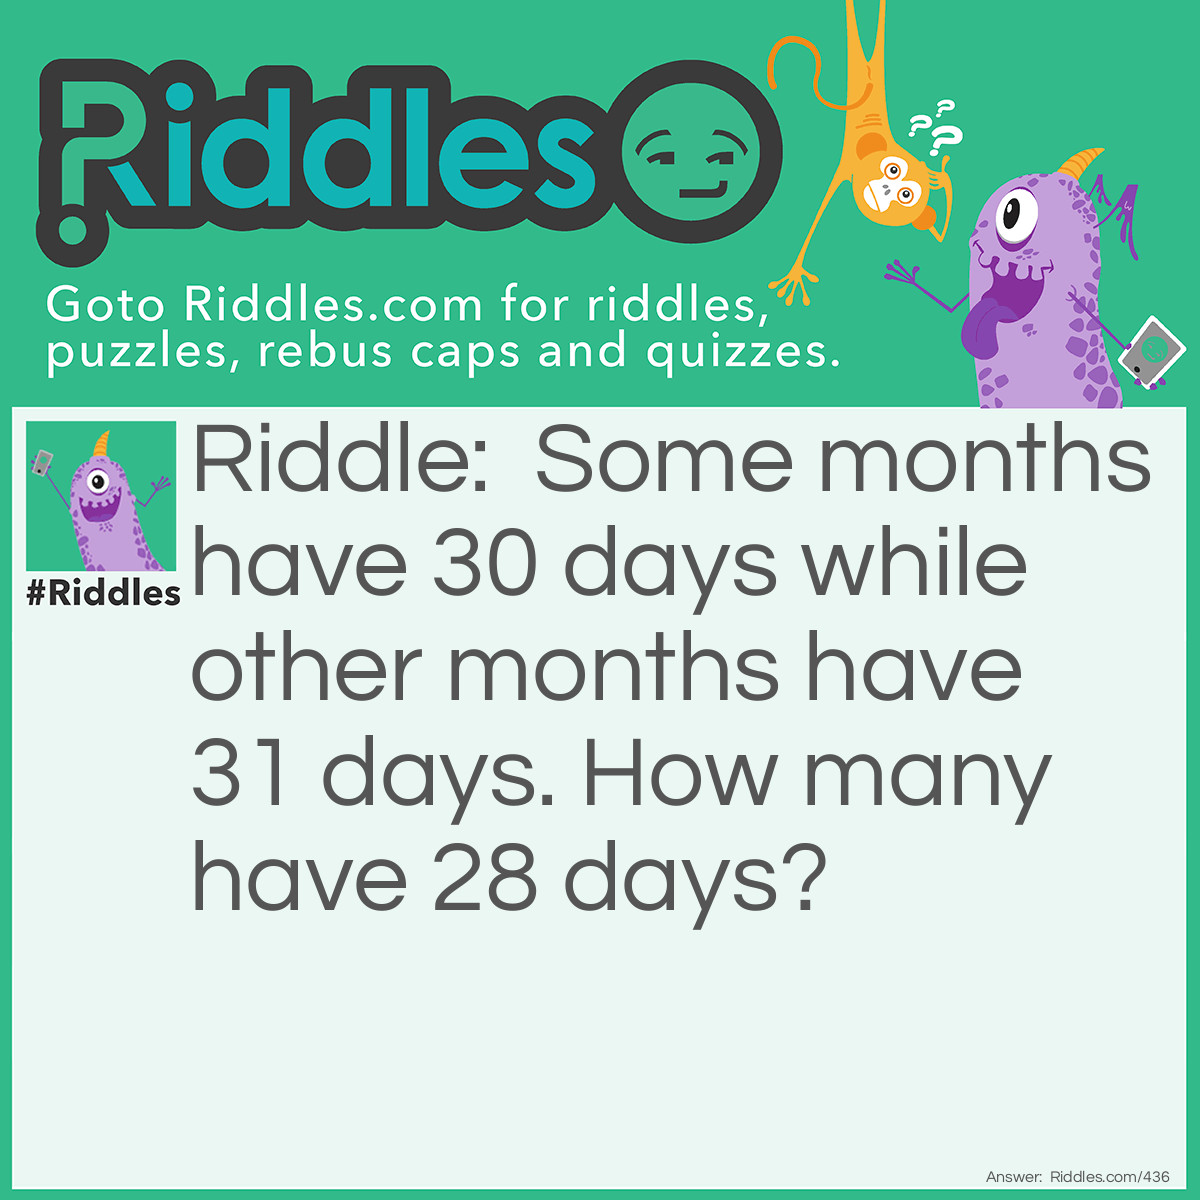 Riddle: Some months have 30 days while other months have 31 days. How many have 28 days?  Answer: Every month has a 28th so they all have 28 days.